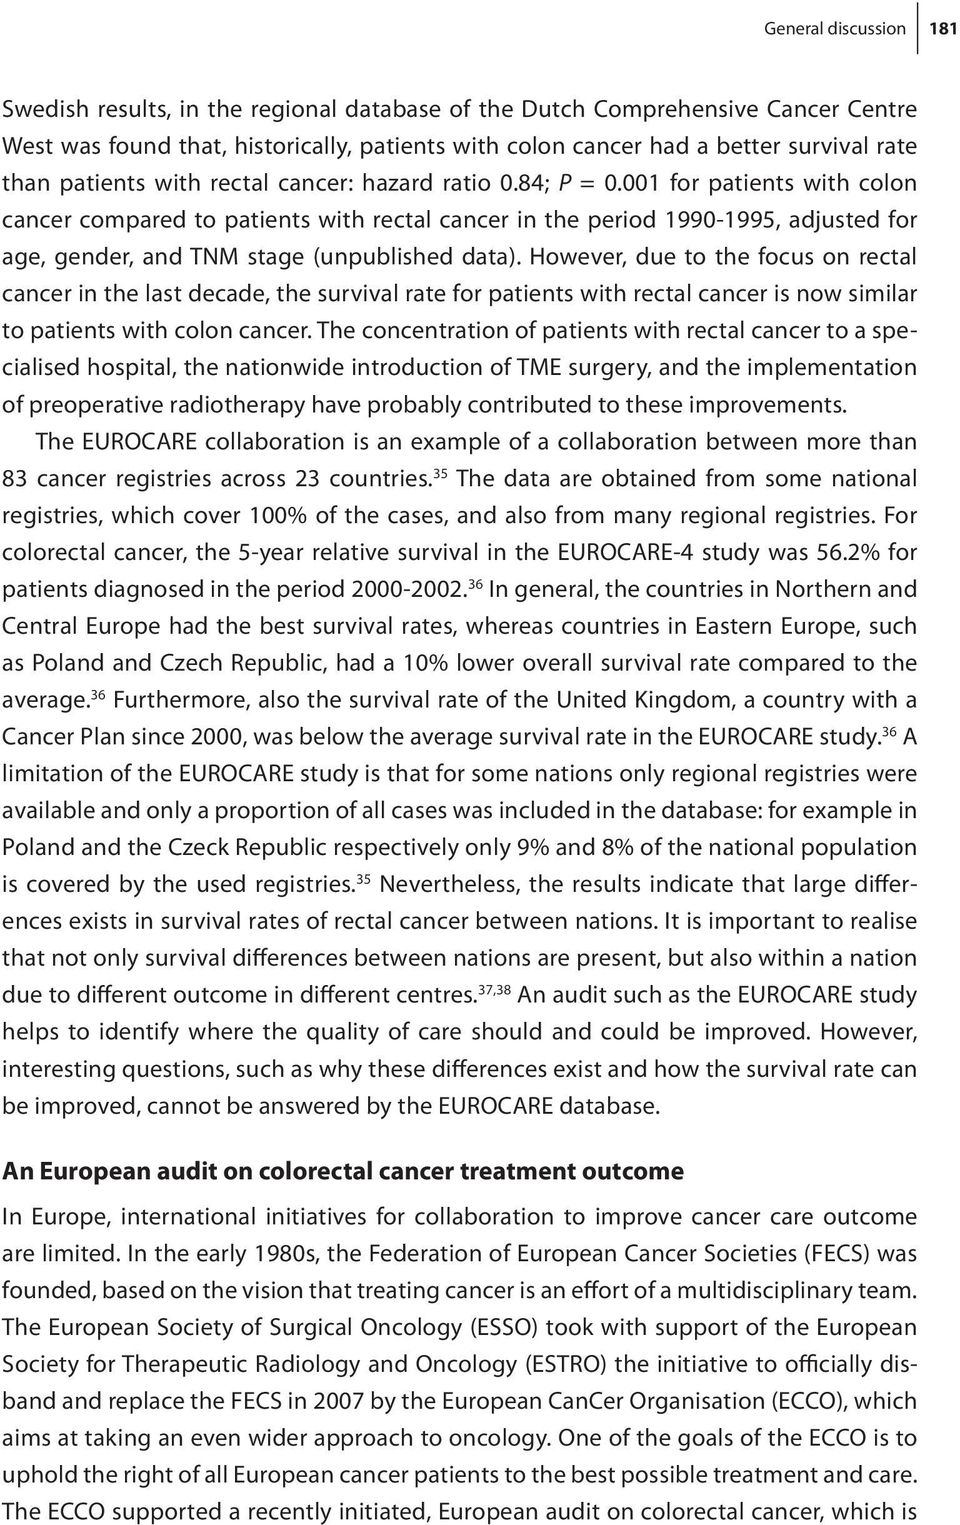 001 for patients with colon cancer compared to patients with rectal cancer in the period 1990-1995, adjusted for age, gender, and TNM stage (unpublished data).